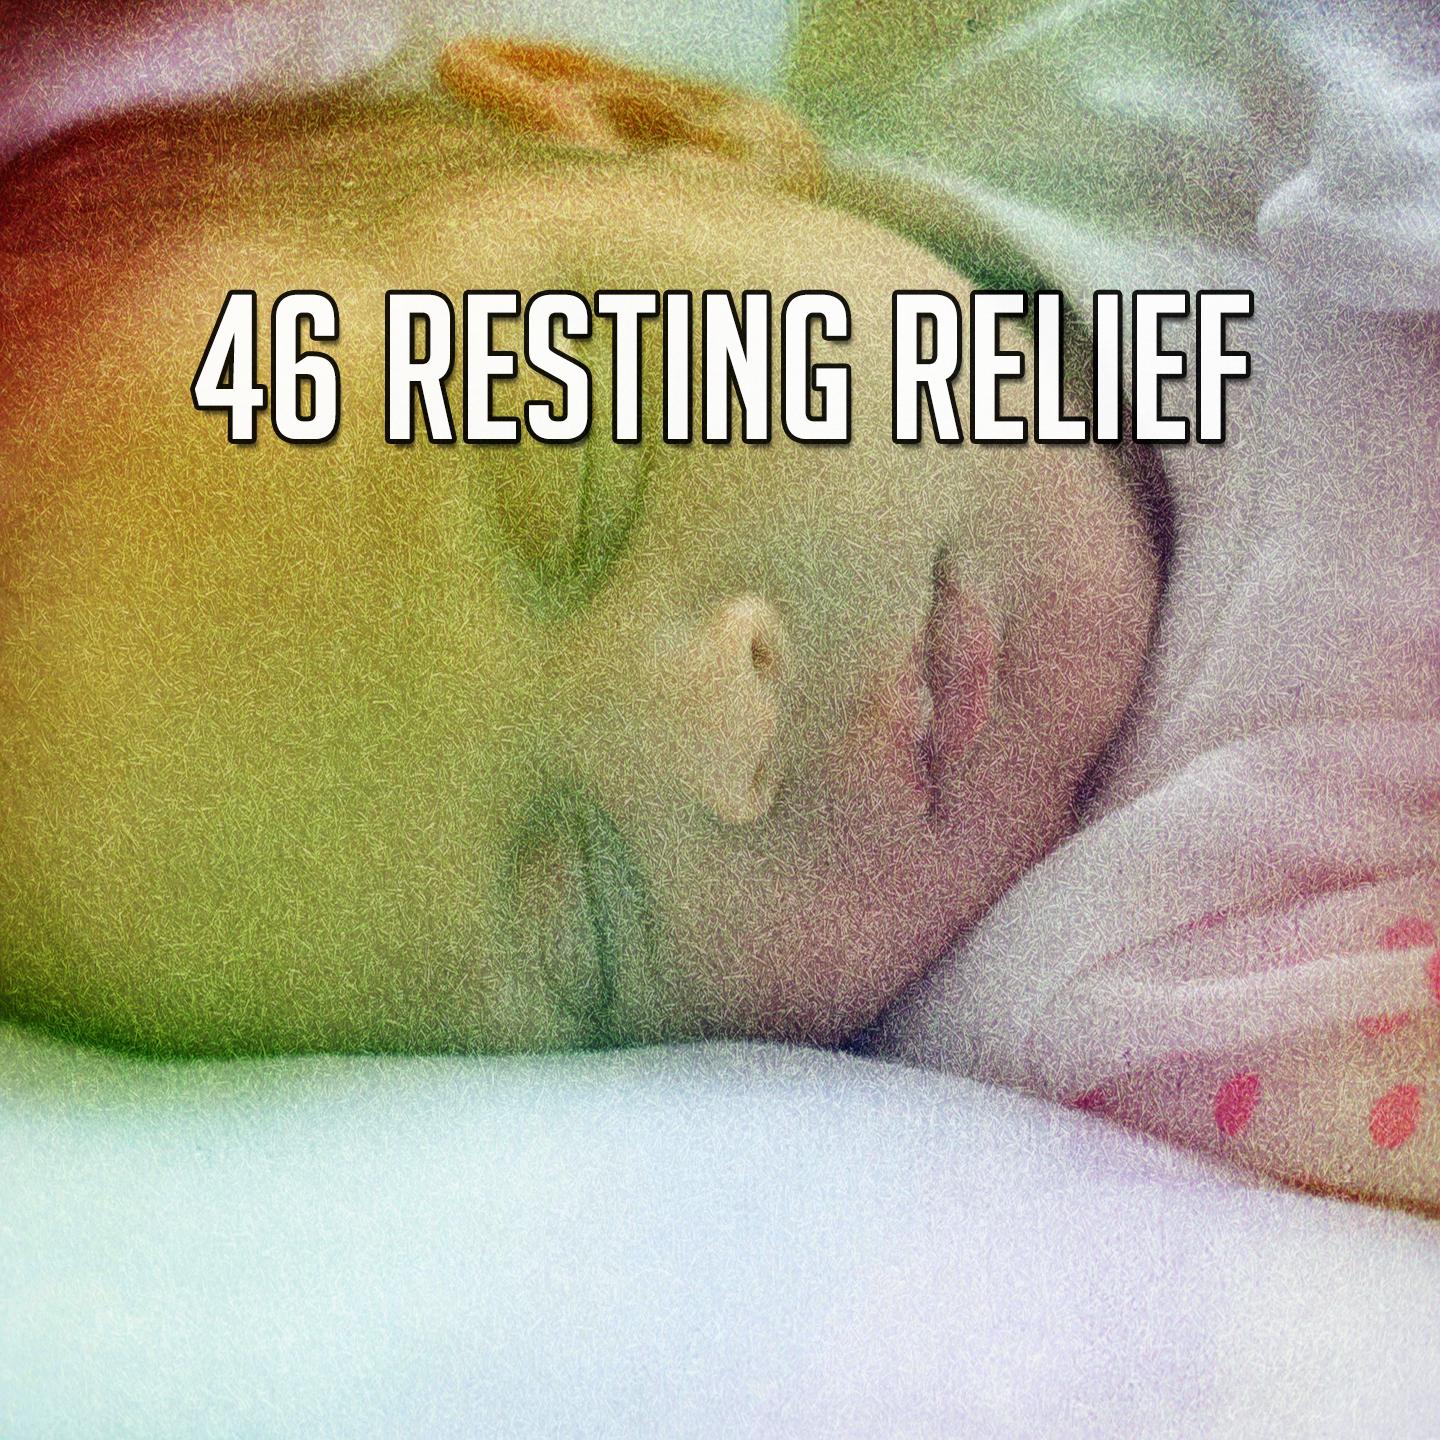 46 Resting Relief